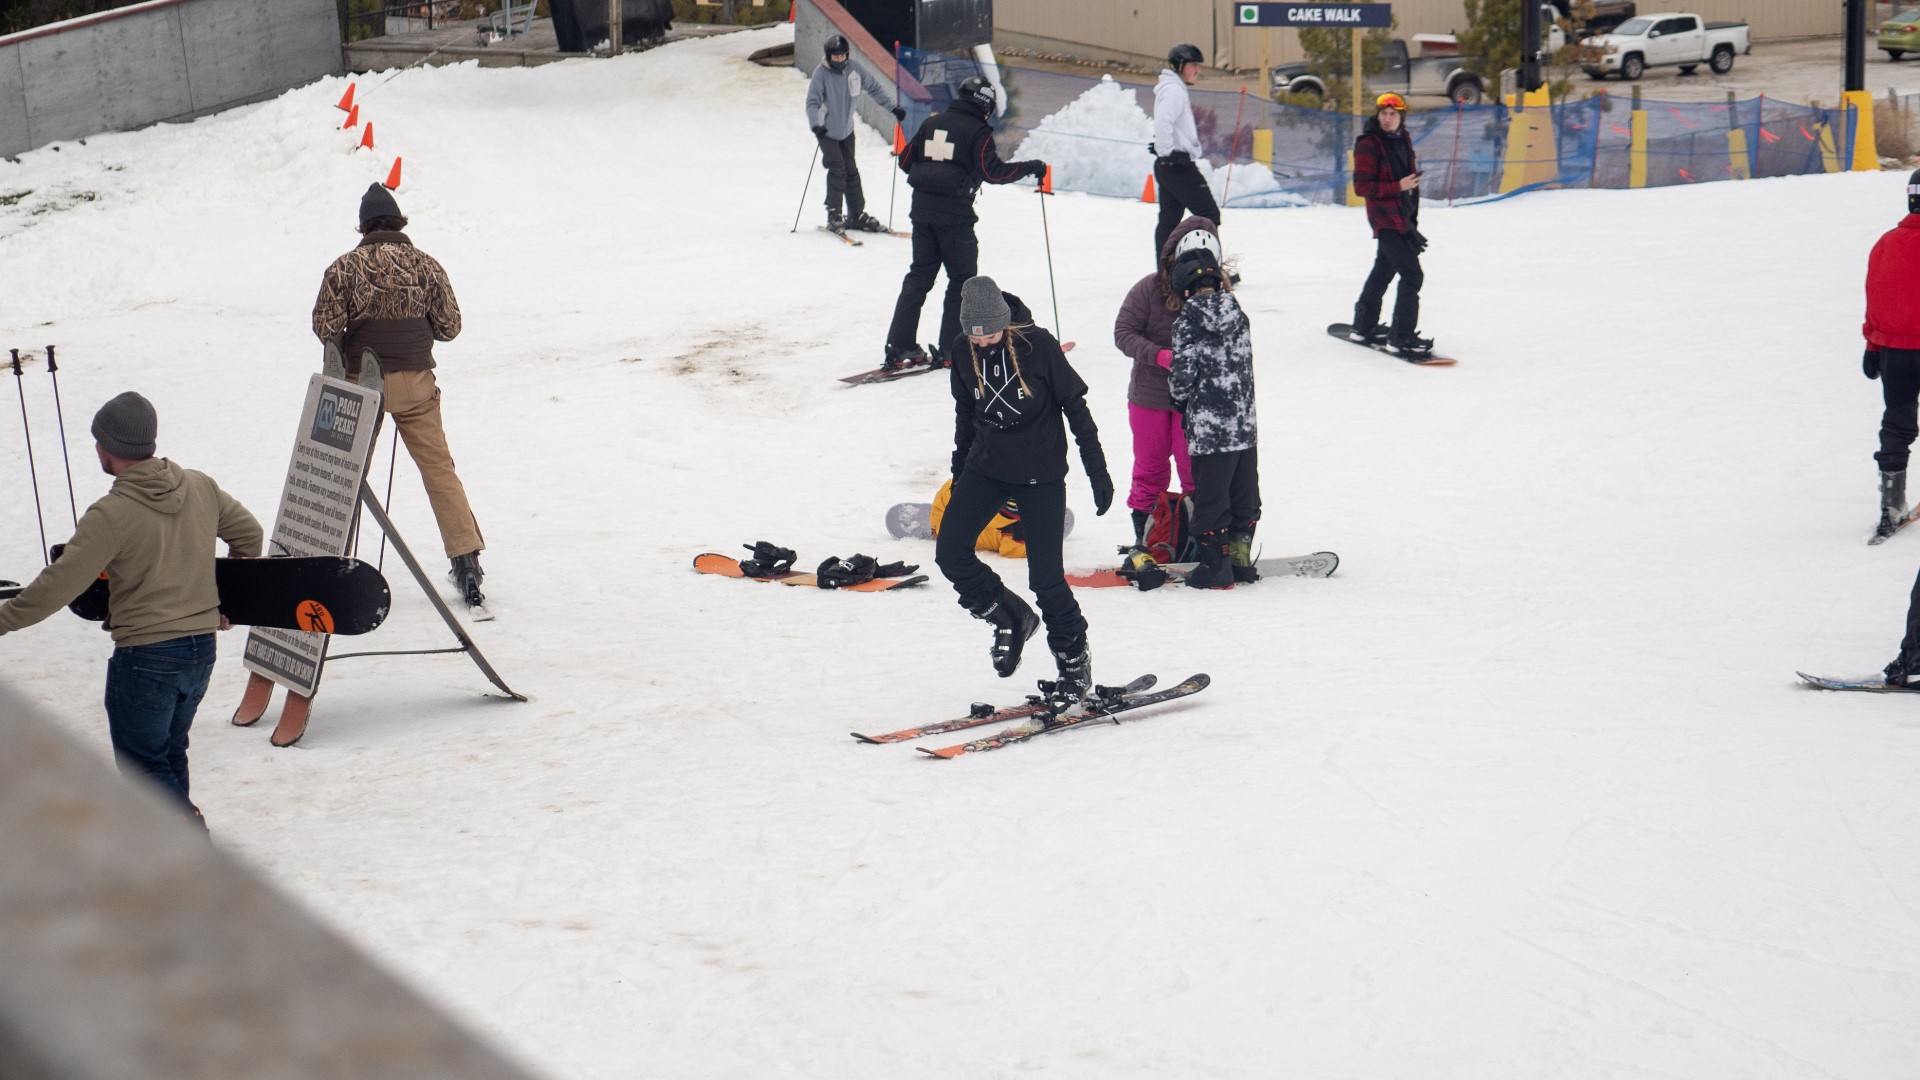 The popular skiing location held a grand reopening after warmer weather caused it to temporarily shut down.